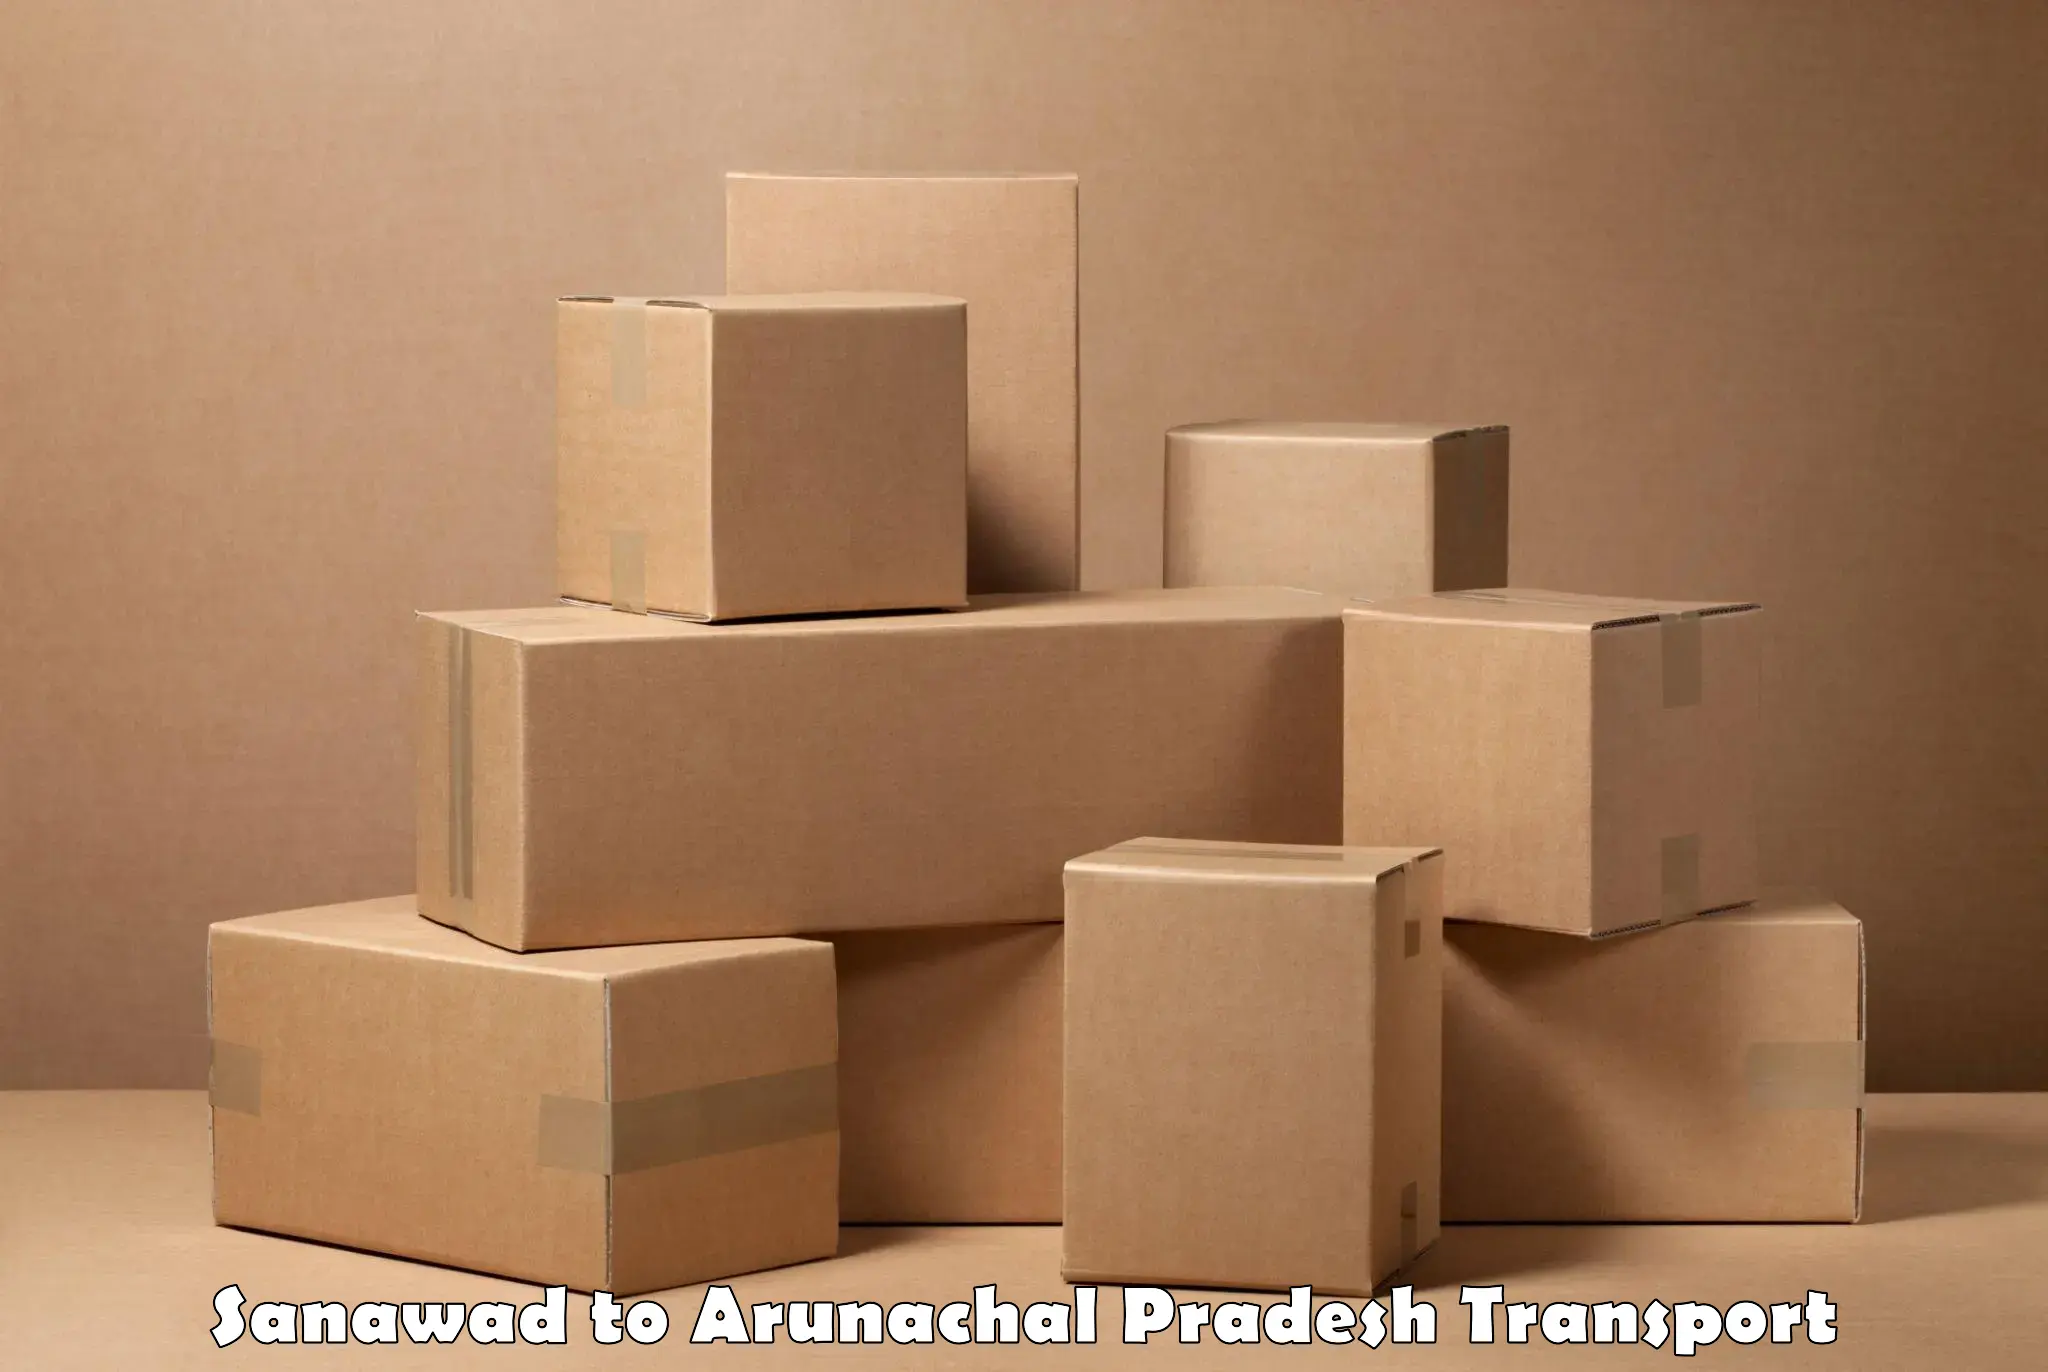 Parcel transport services Sanawad to Tawang